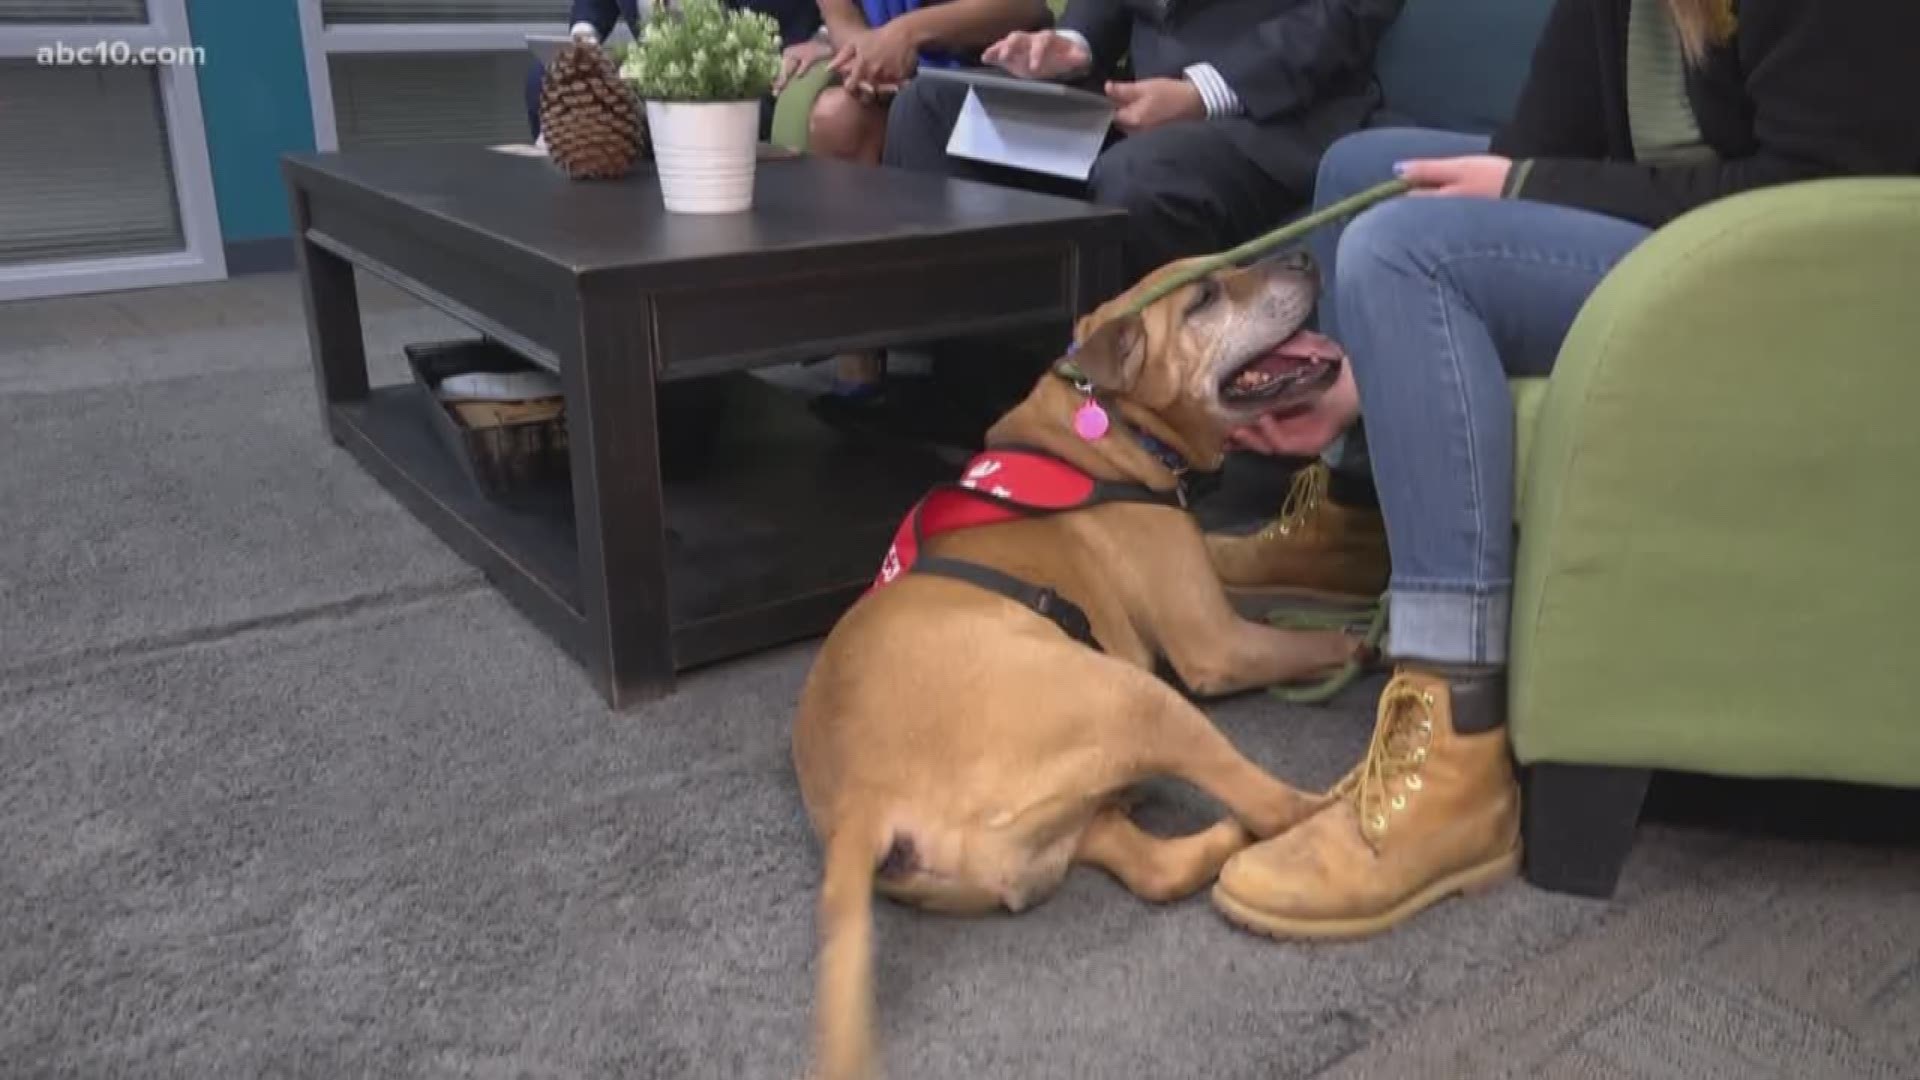 You can adopt Gus at the Yolo County Animal Shelter right now. And adoption fees are waived if you mention Morning Blend.